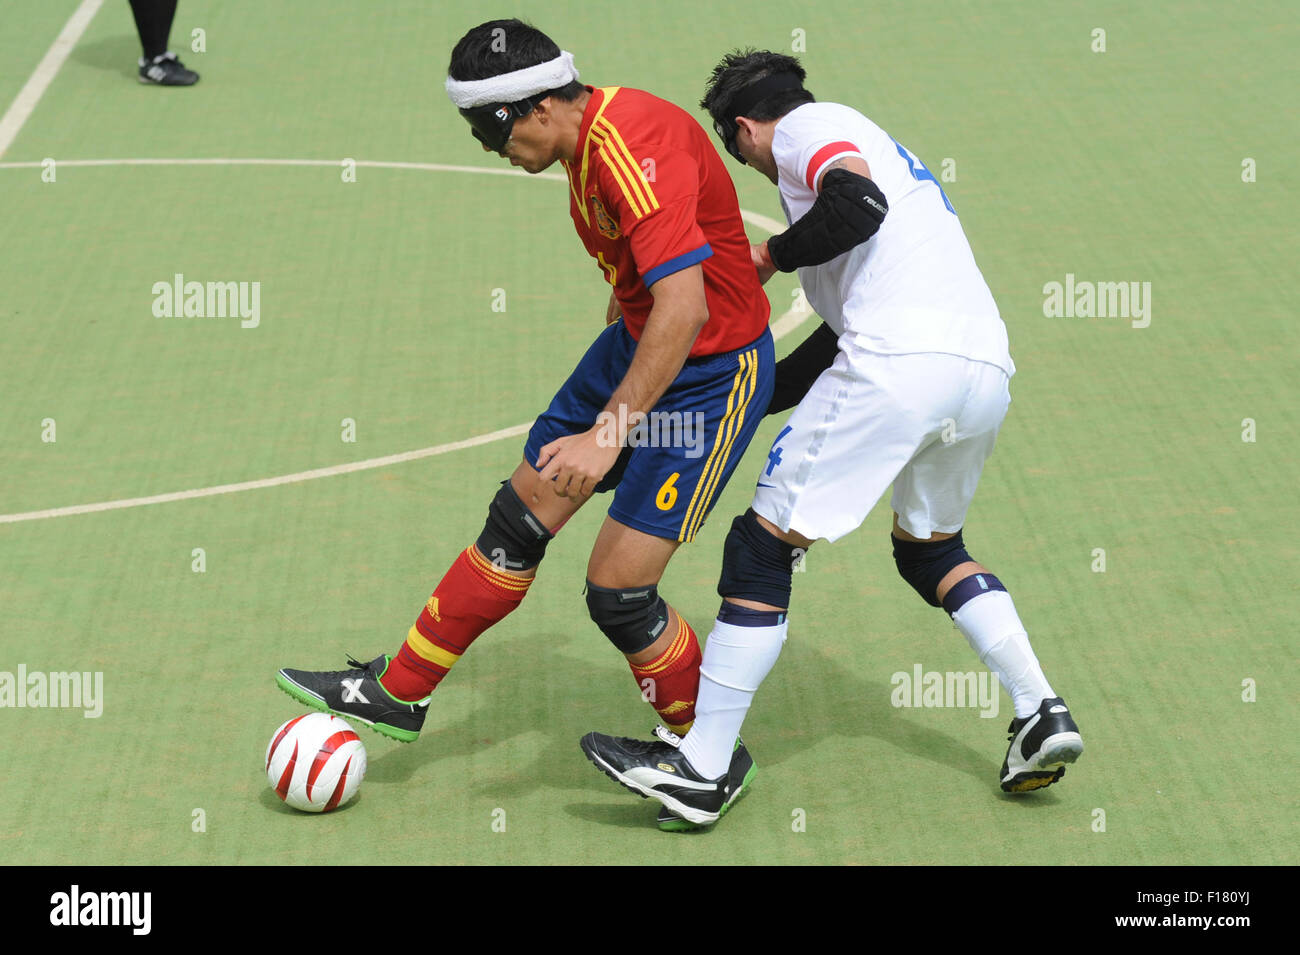 Hereford, UK. 29th Aug, 2015. IBSA Blind Football European Championships 2015 - 3rd/4th place play-off - England v Spain. Point 4, Royal National College for the Blind, Hereford. Spain Captain Adolfo Costa & England Captain Keryn Seal. Credit:  James Maggs/Alamy Live News Stock Photo